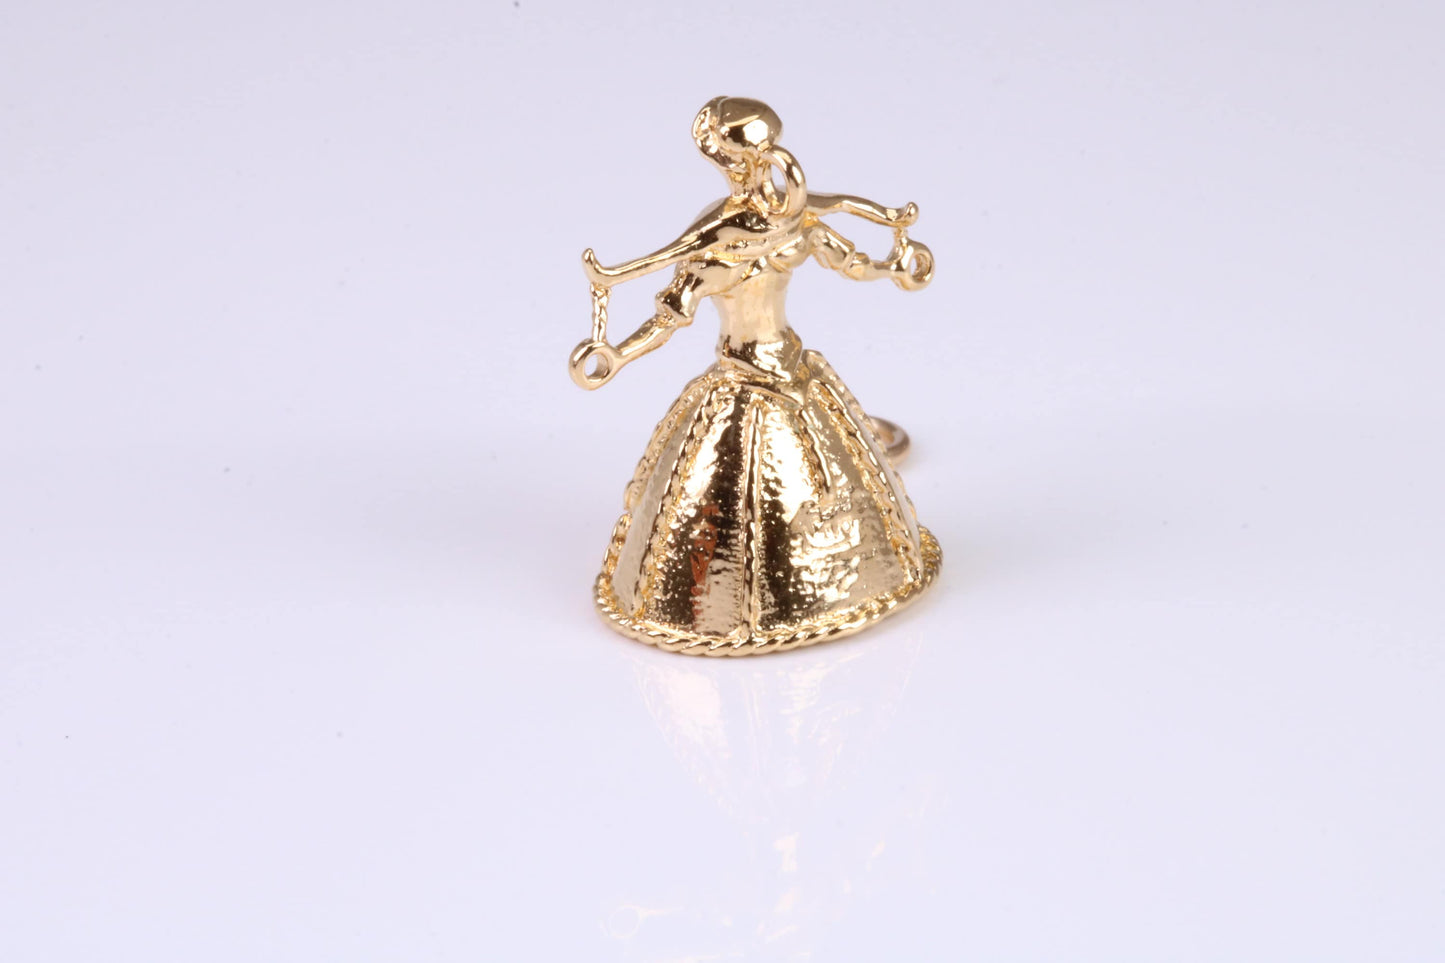 Water Carrier Charm, Traditional Charm, Made from Solid Yellow Gold, British Hallmarked, Complete with Attachment Link